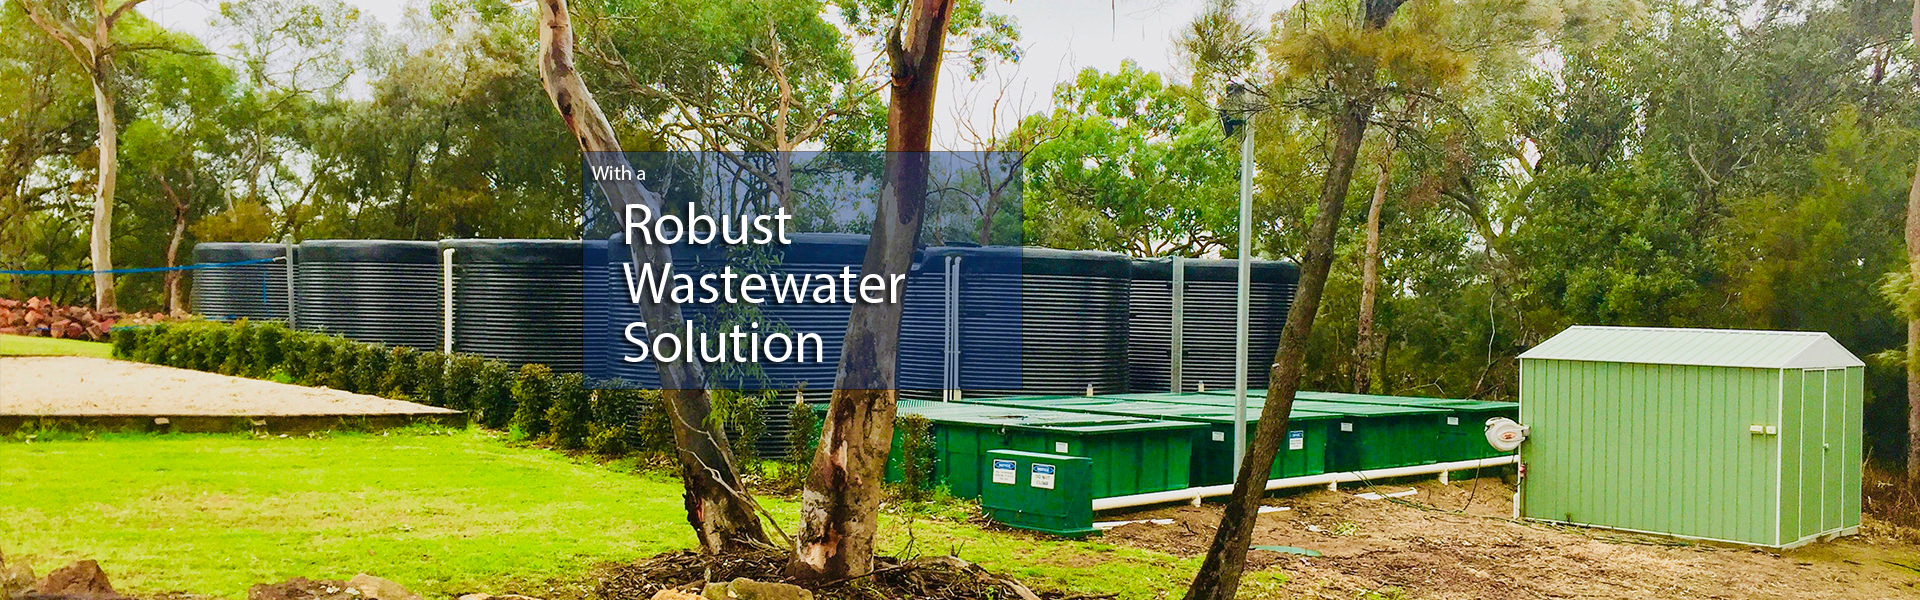 Robust Wastewater Soltion